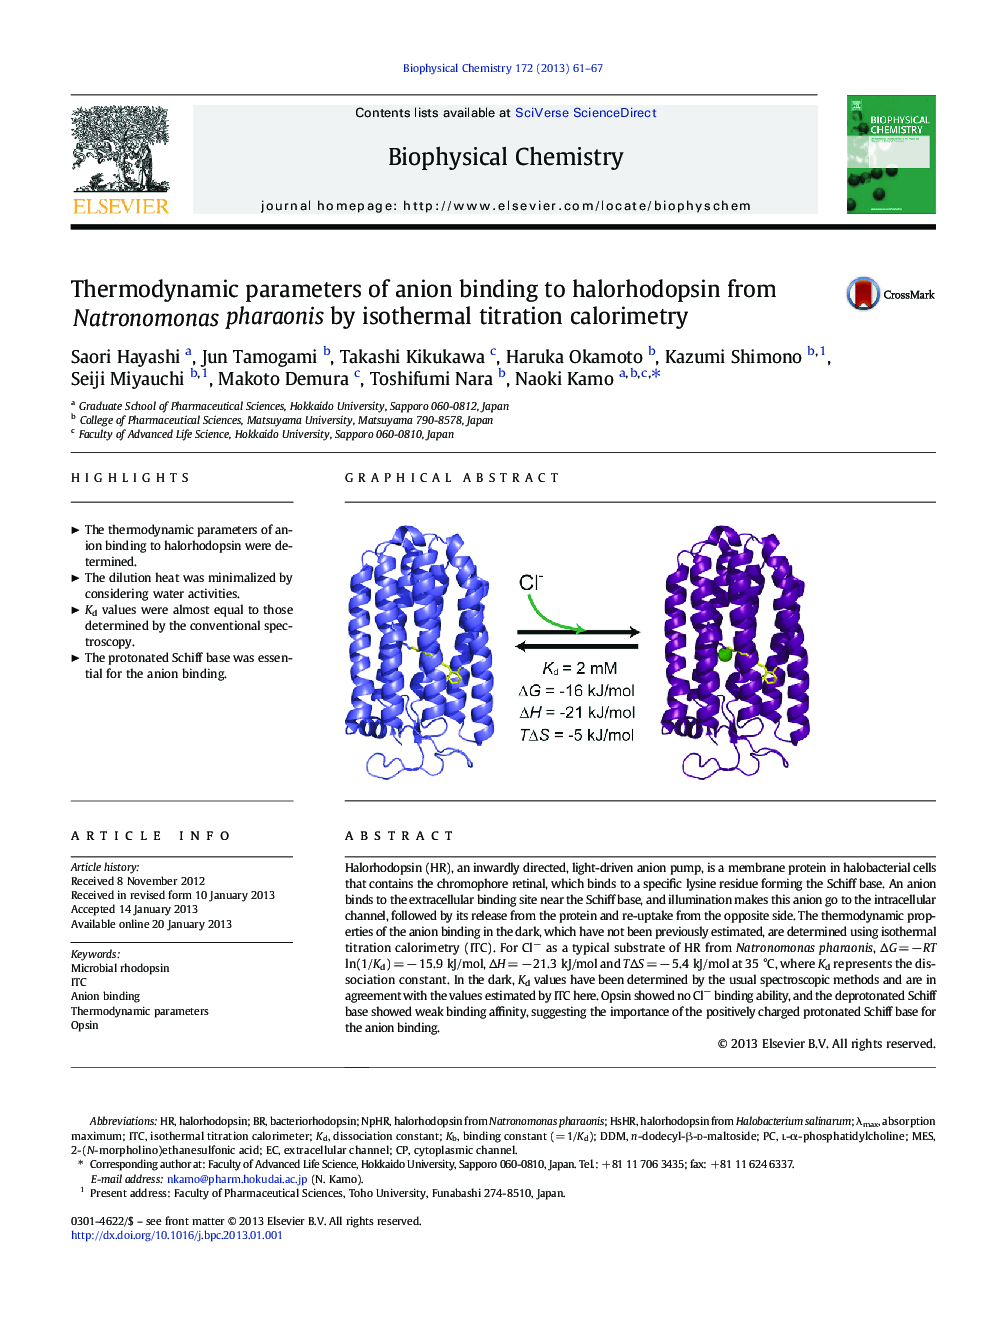 Thermodynamic parameters of anion binding to halorhodopsin from Natronomonas pharaonis by isothermal titration calorimetry